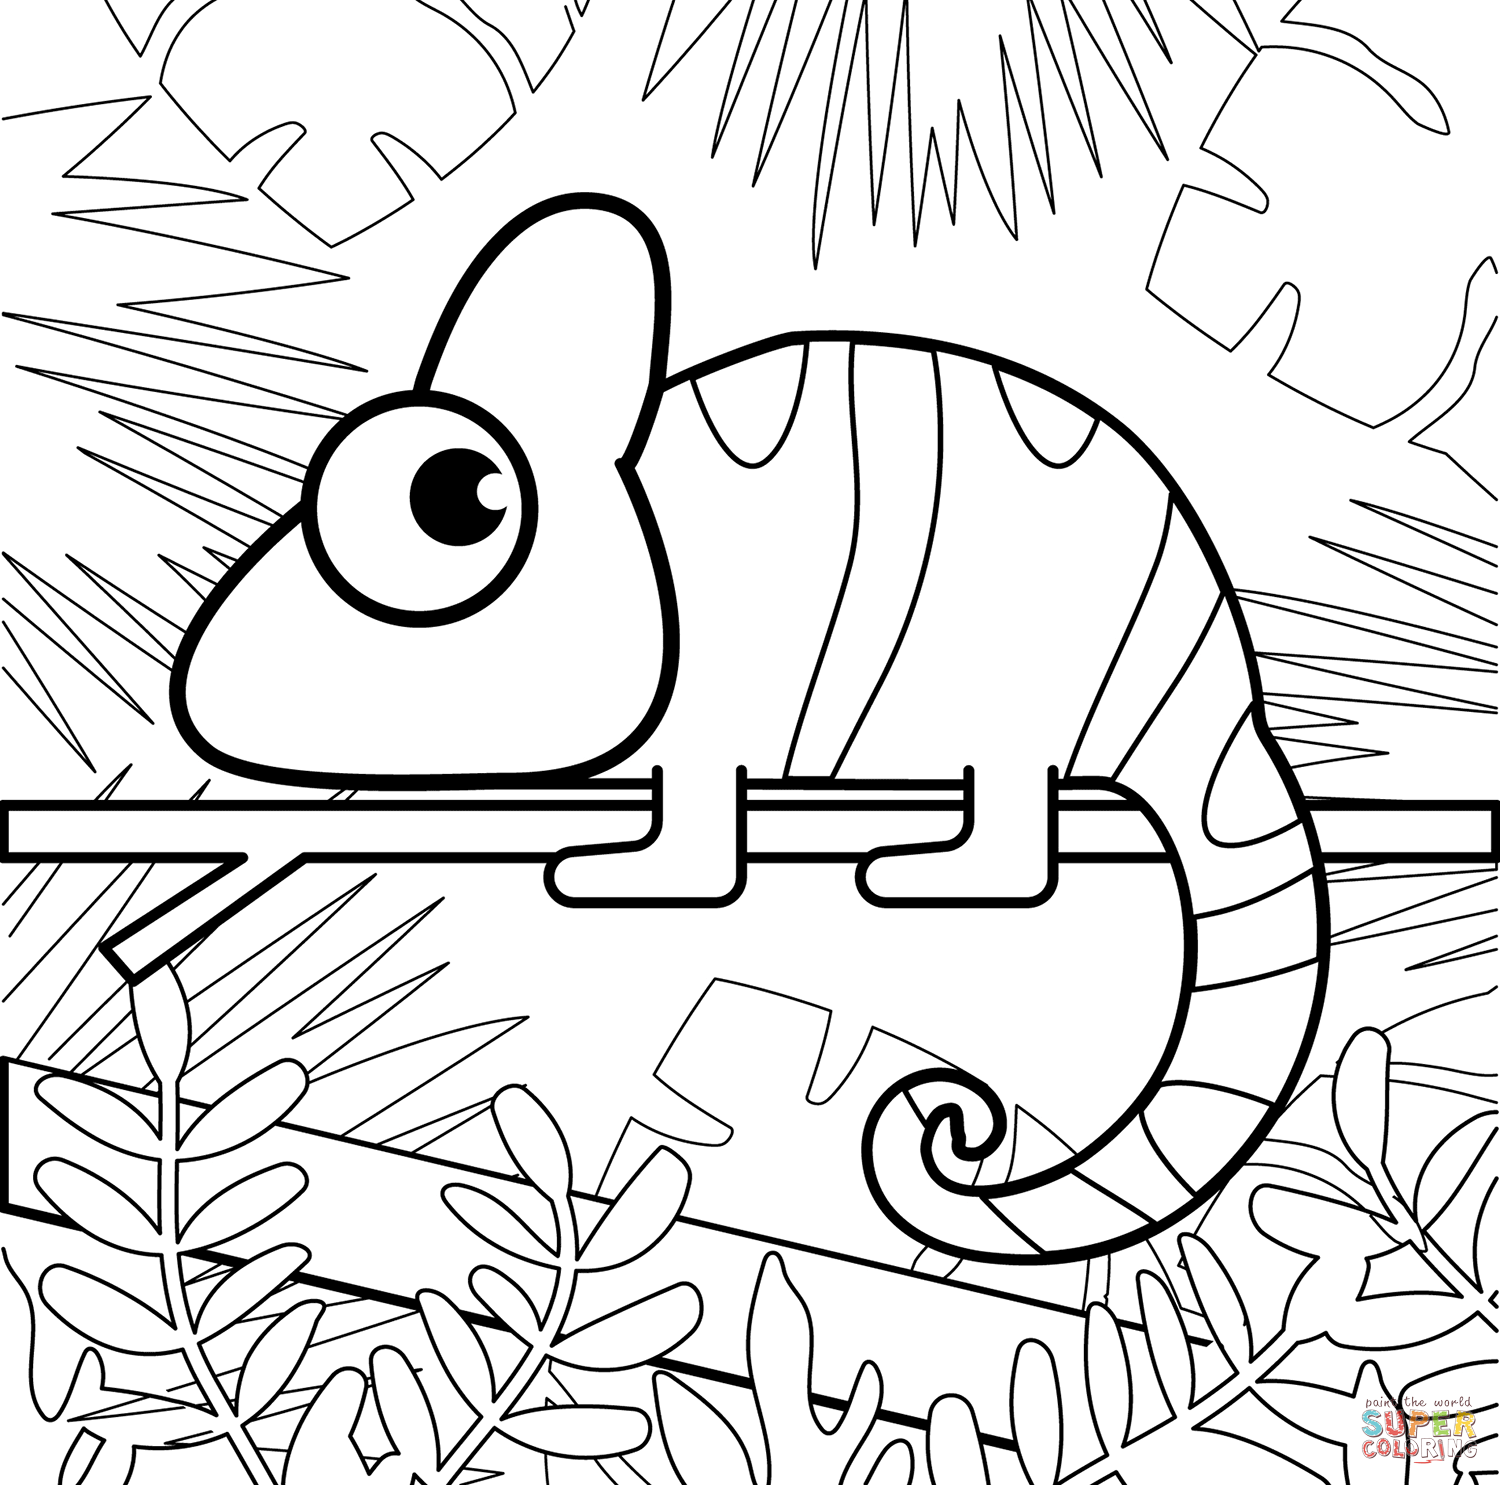 Chameleon coloring page free printable coloring pages